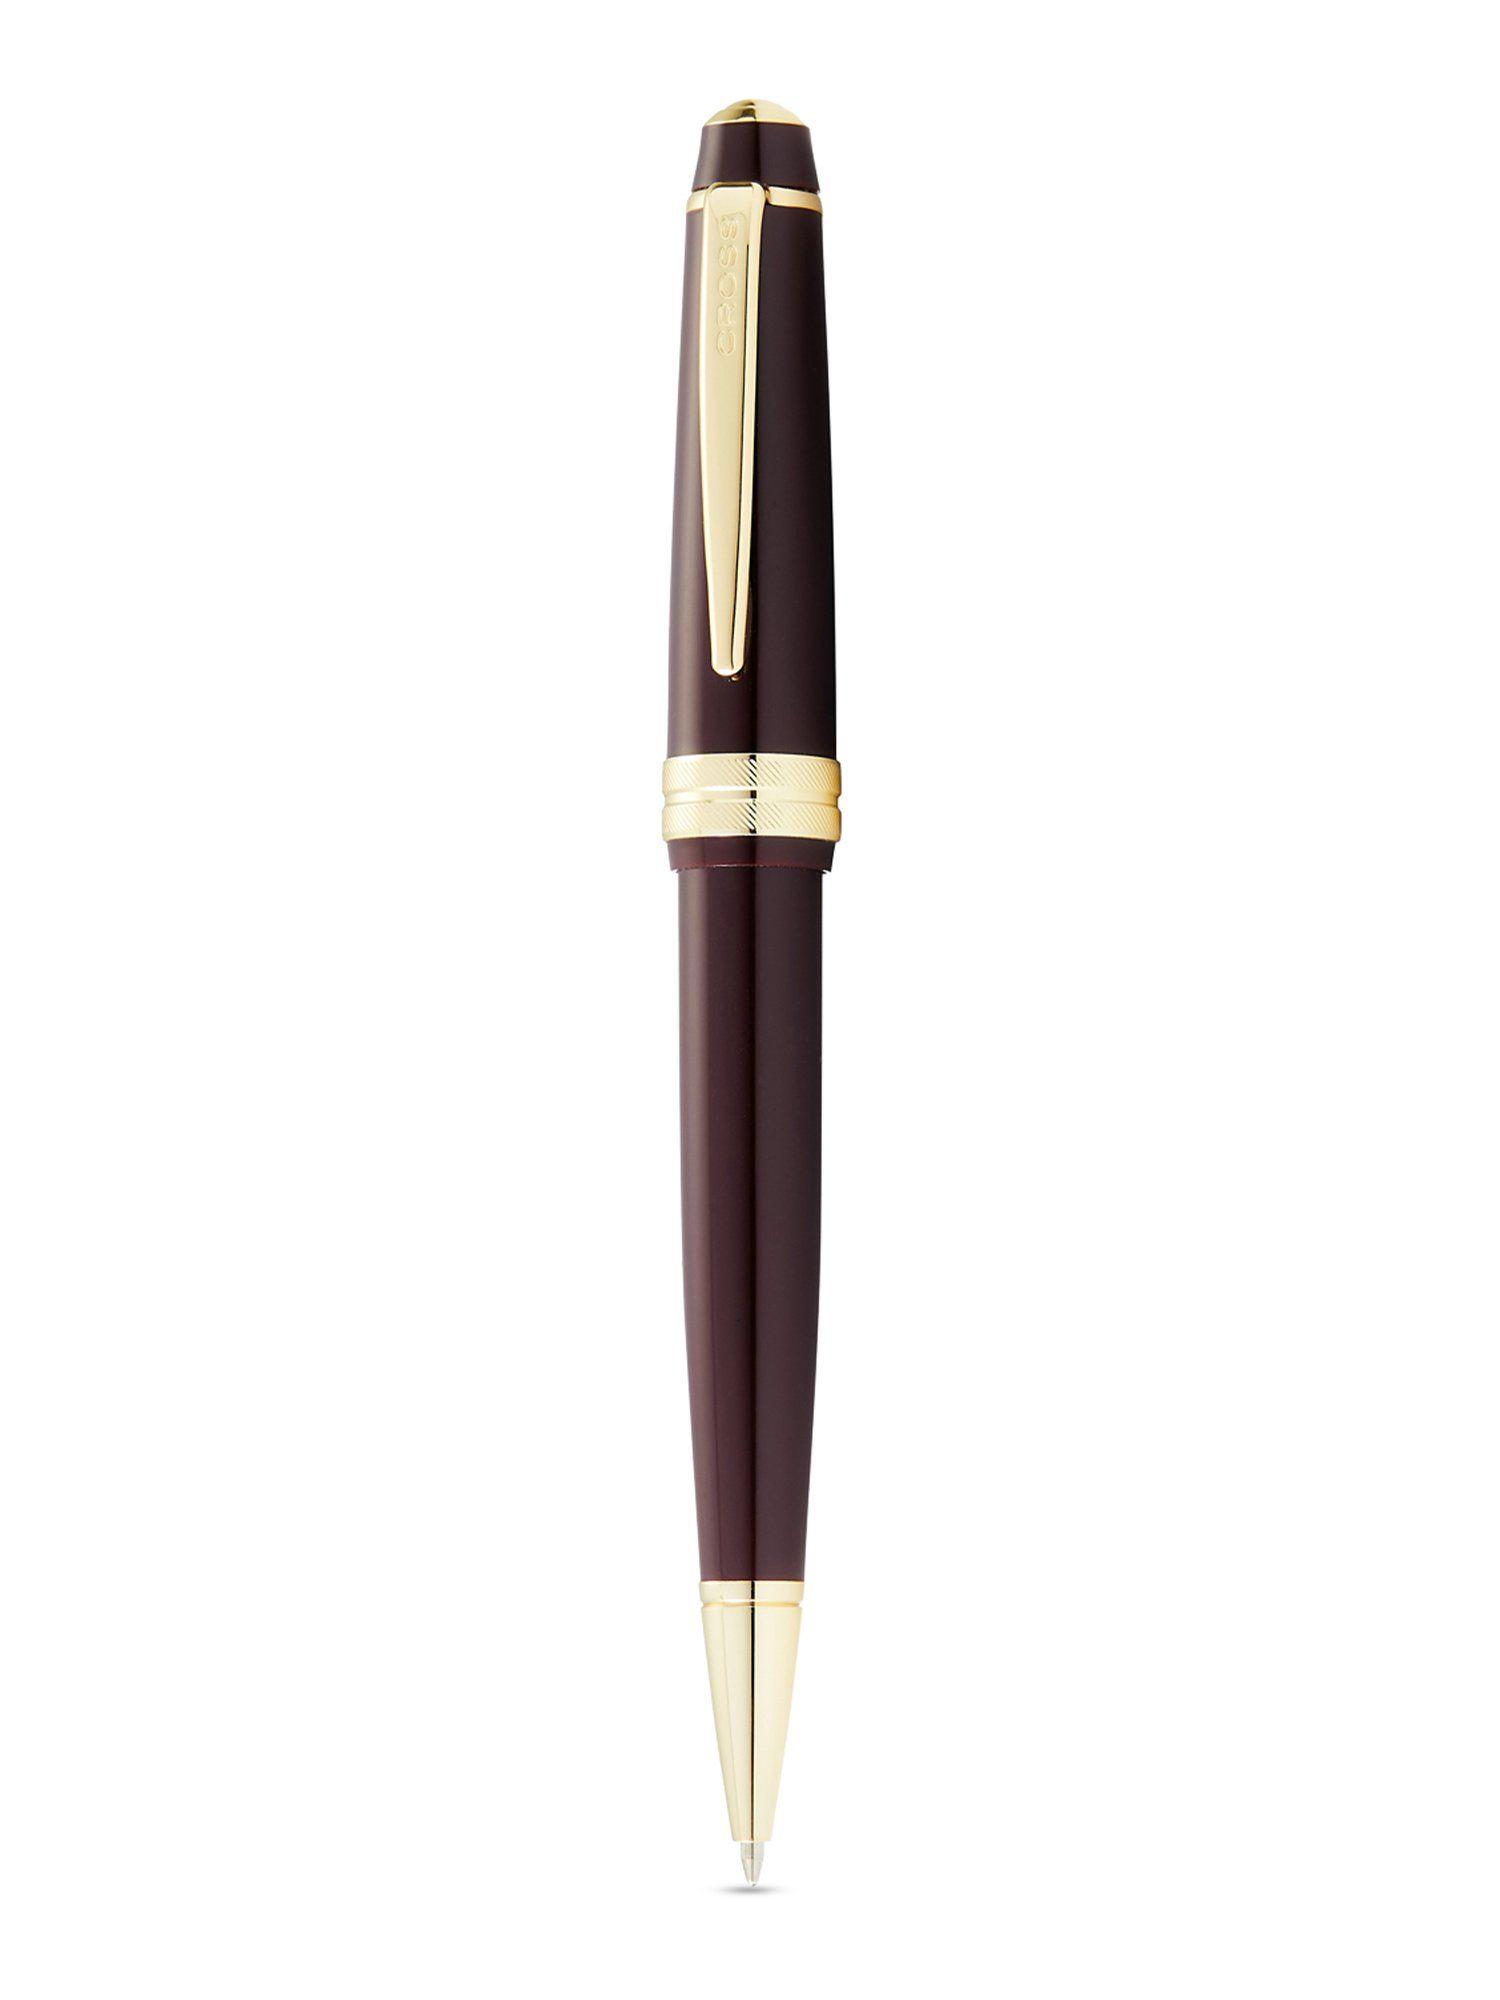 at0742-11 bailey light burgundy (red) resin ballpoint pen with gold